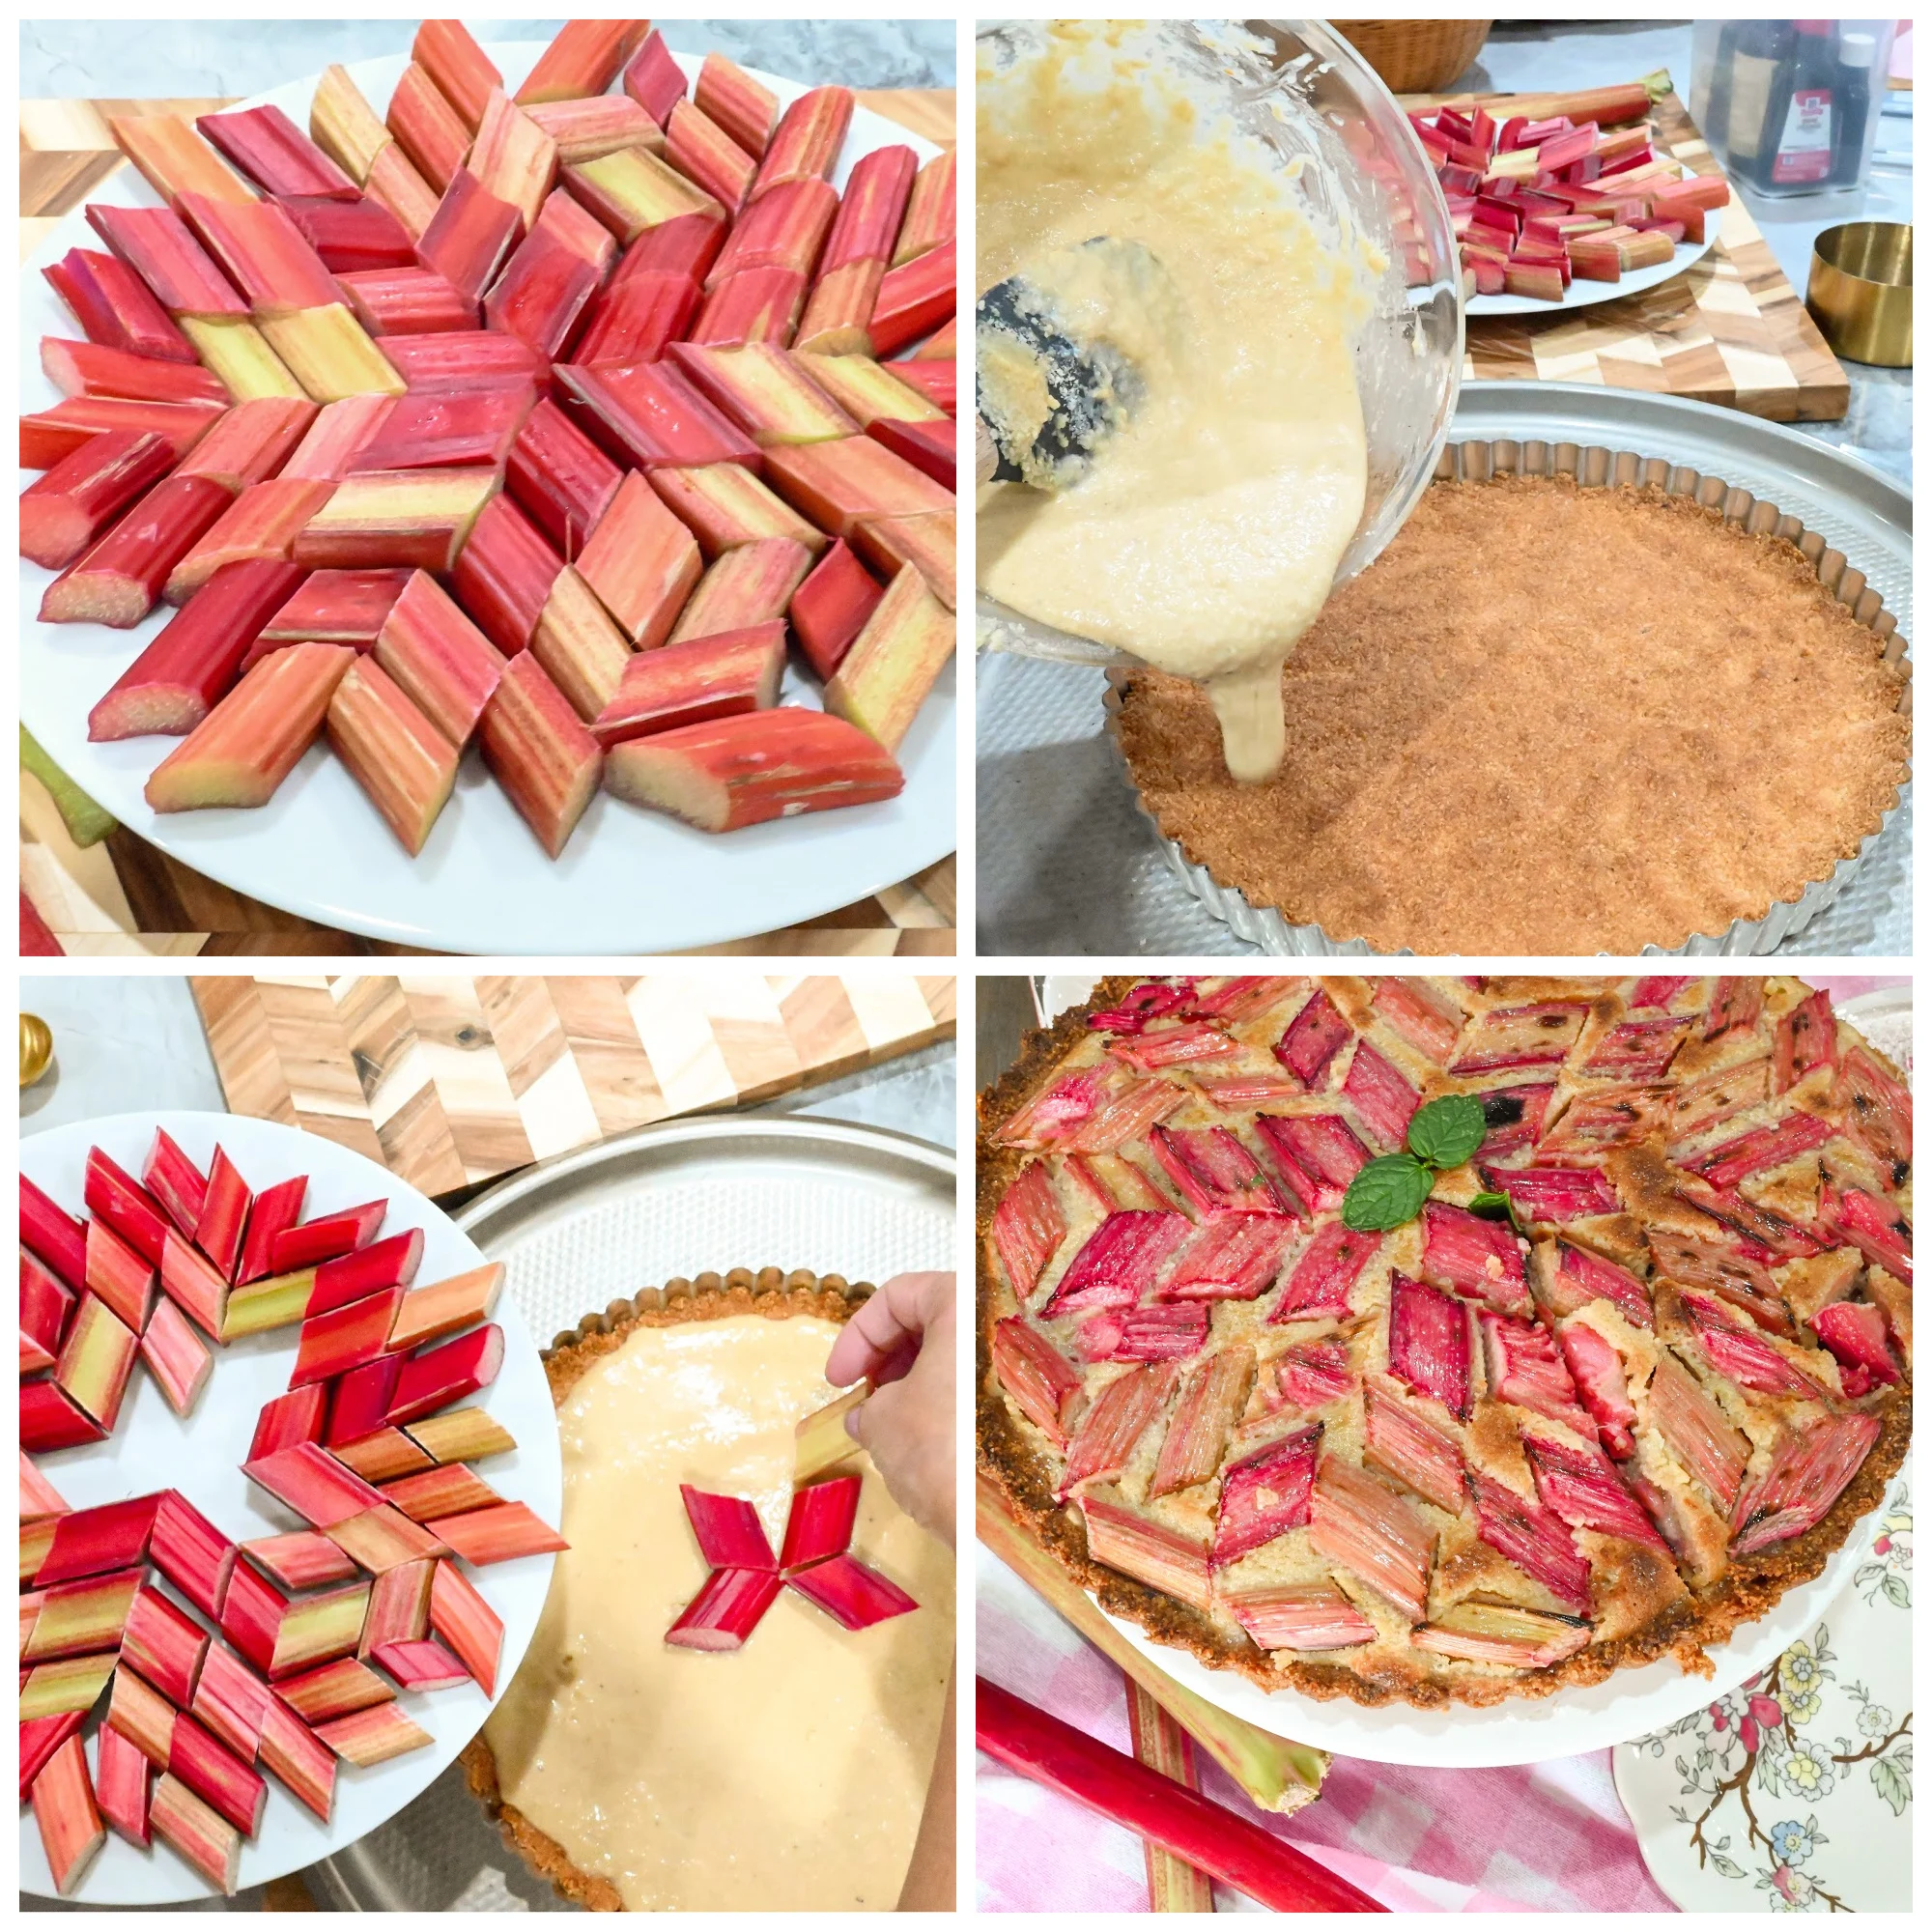 Keto rhubarb tart with frangipane filling process pictures